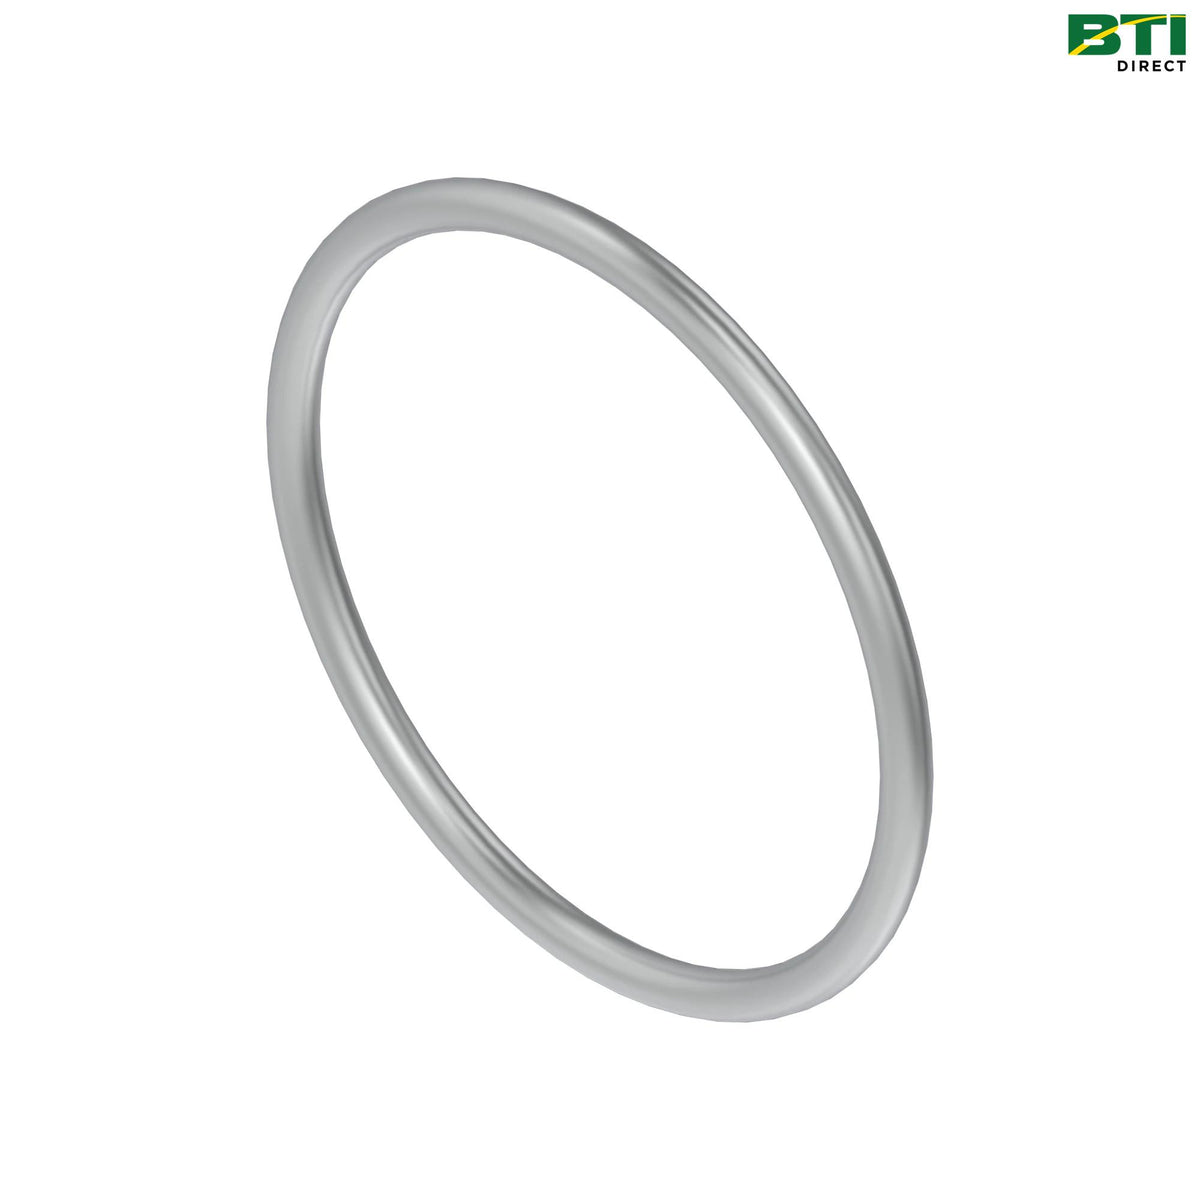 R26282: Round Cross Section O-Ring – BTI Direct